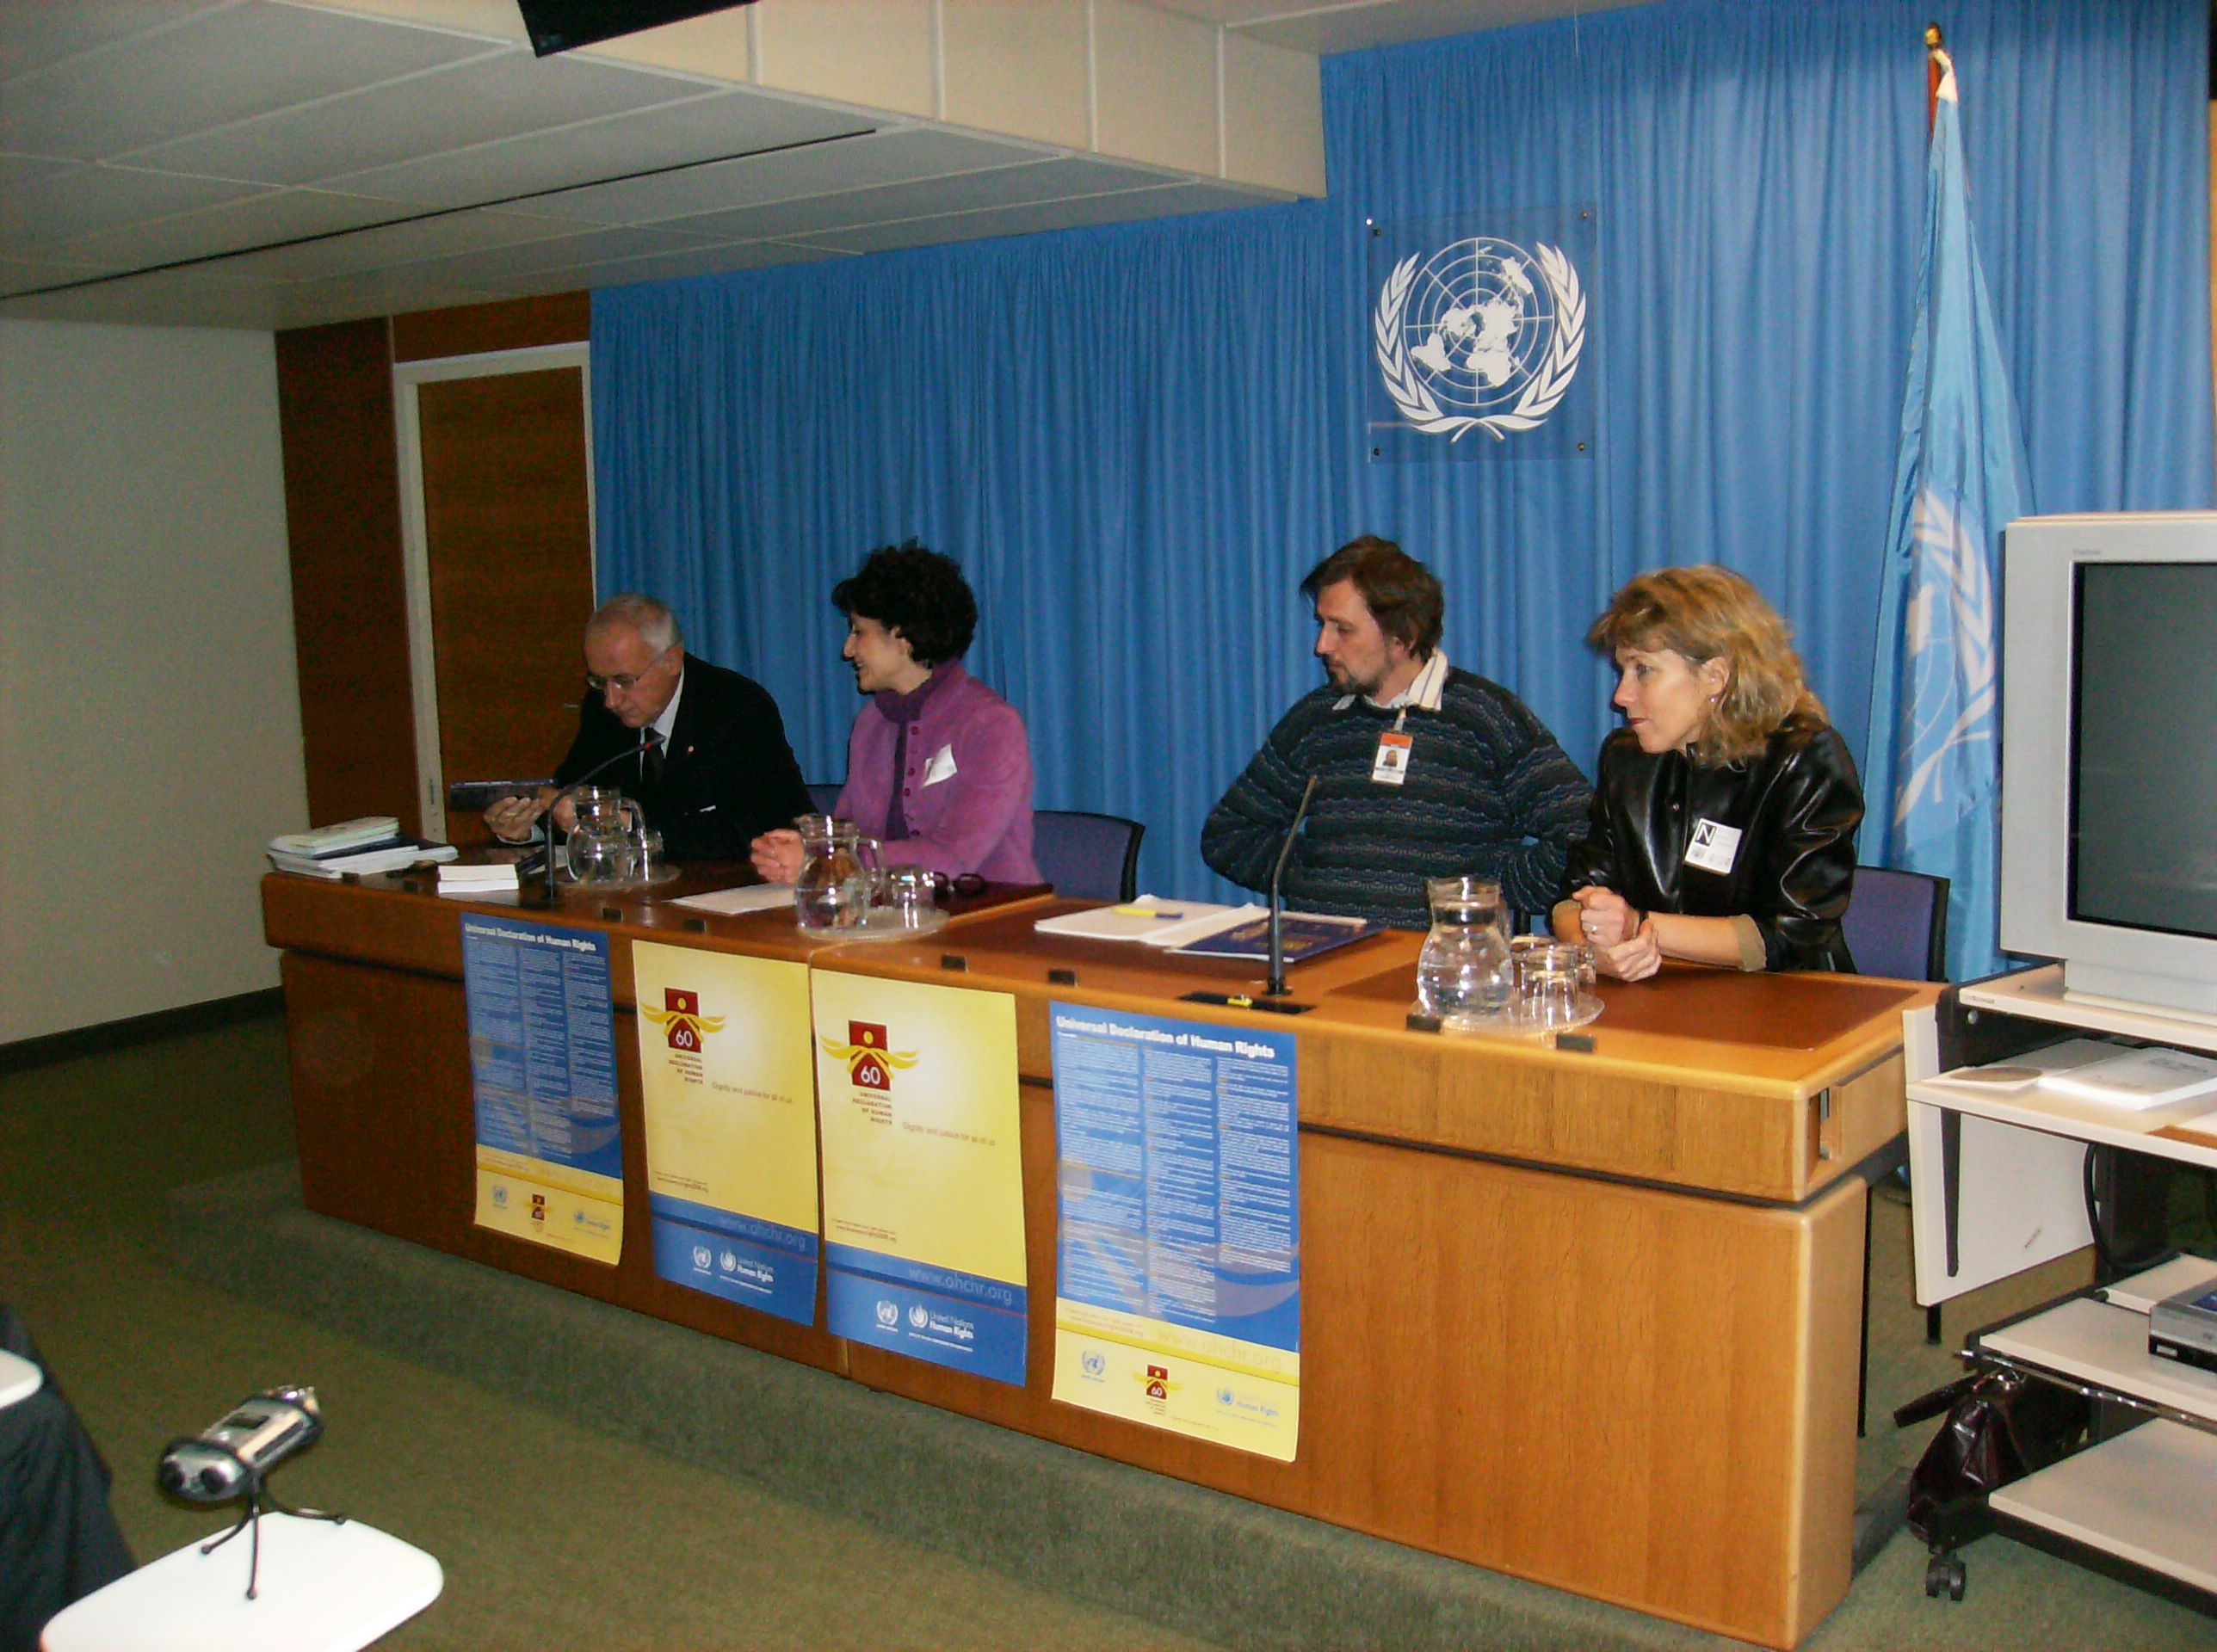 Vienna NGO Committee on Peace meeting 10th December 2008 on Peace Education